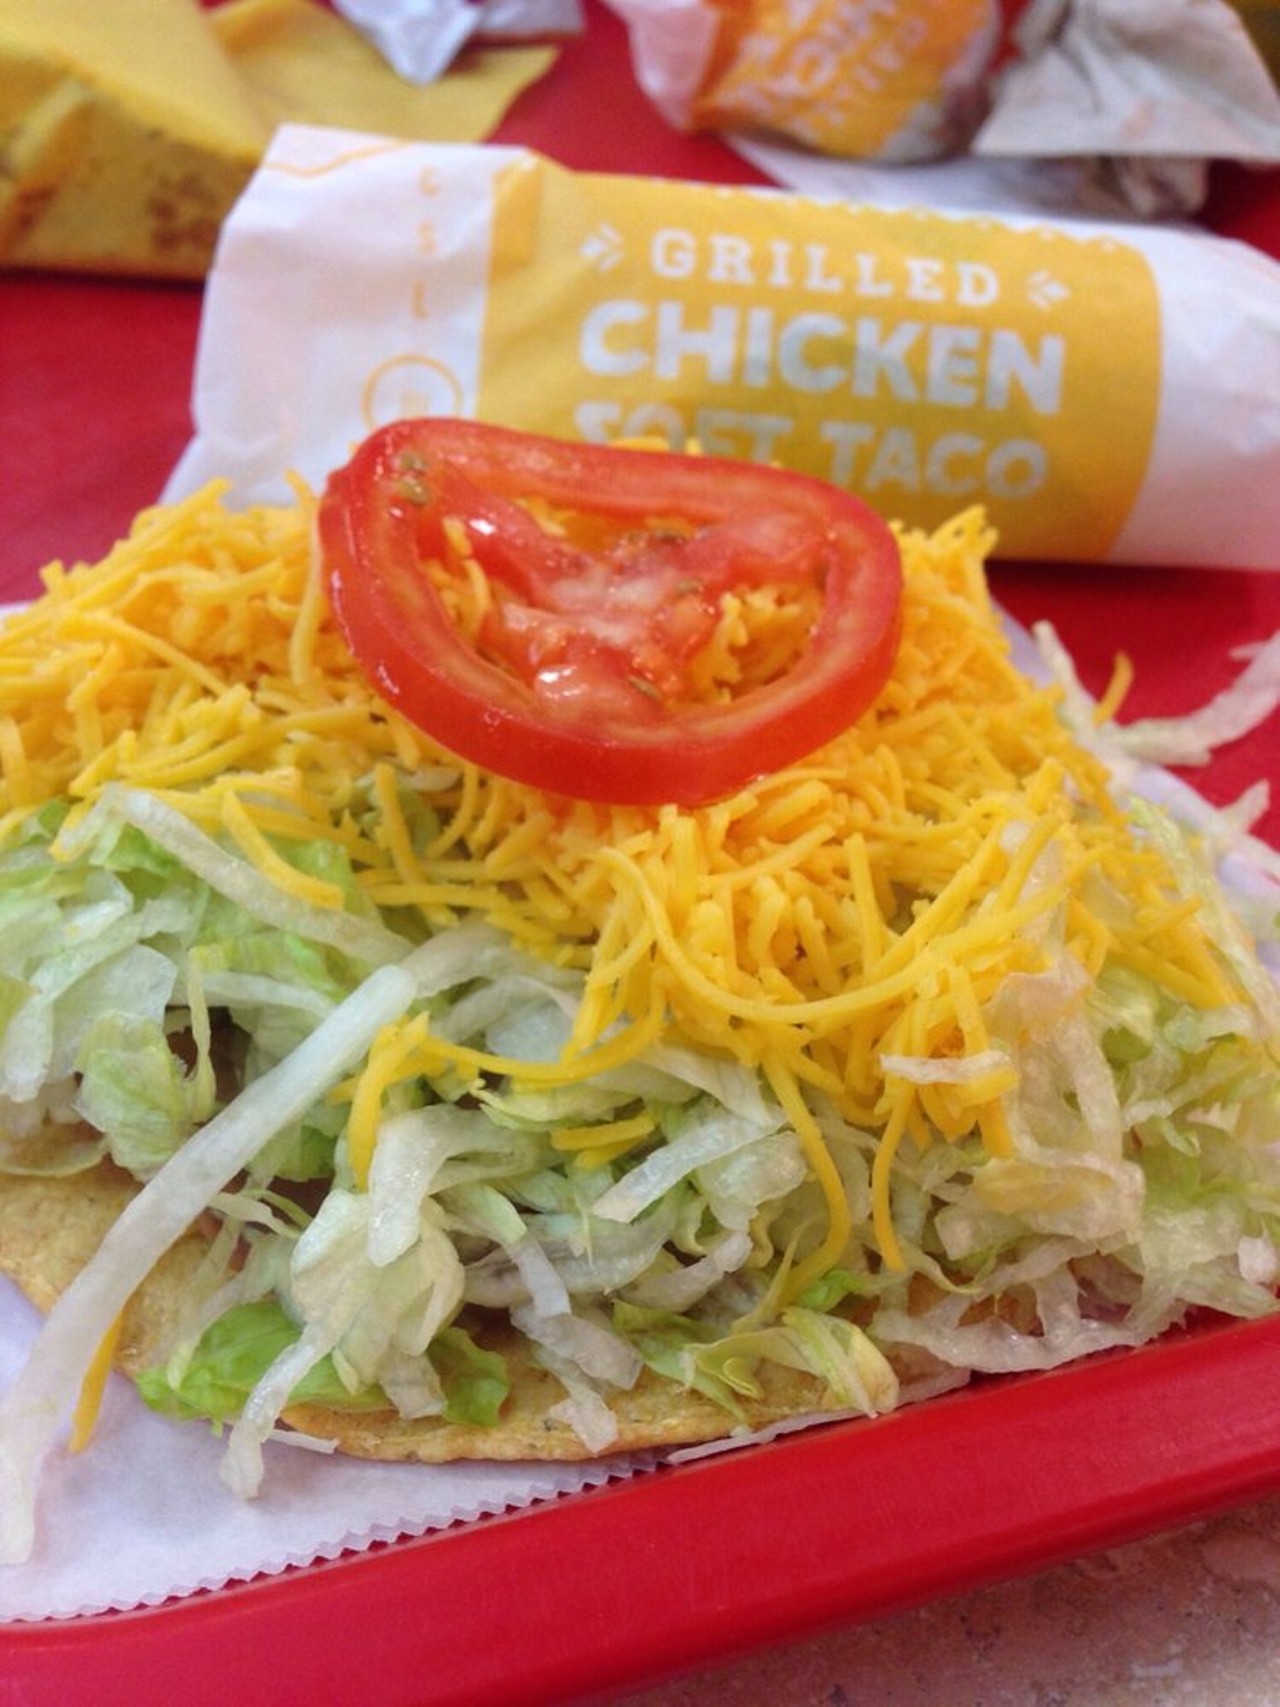 Del Taco - The American/Mexican chain was established in Barstow, California in 1964. There are currently 596 locations across the country, mostly in the Western and Southern United States. There are three locations in Ohio but none in the greater Cleveland area.